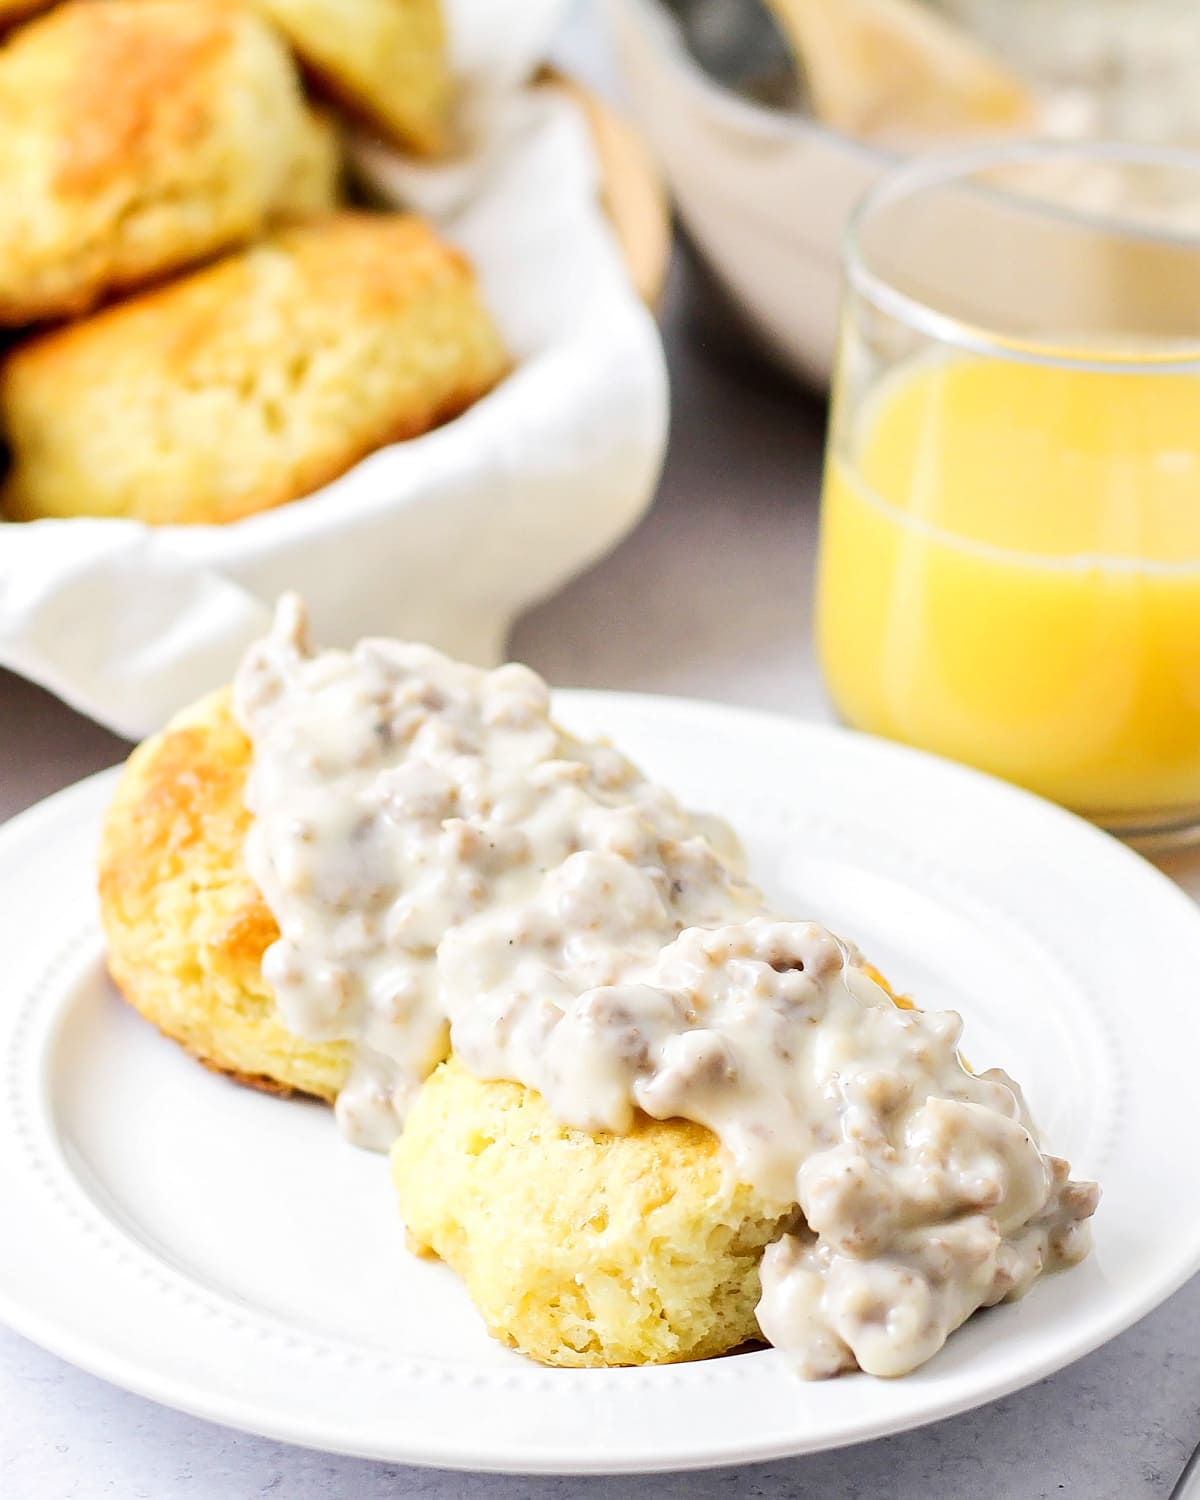 Biscuits and gravy on a white plate served with fresh orange juice.